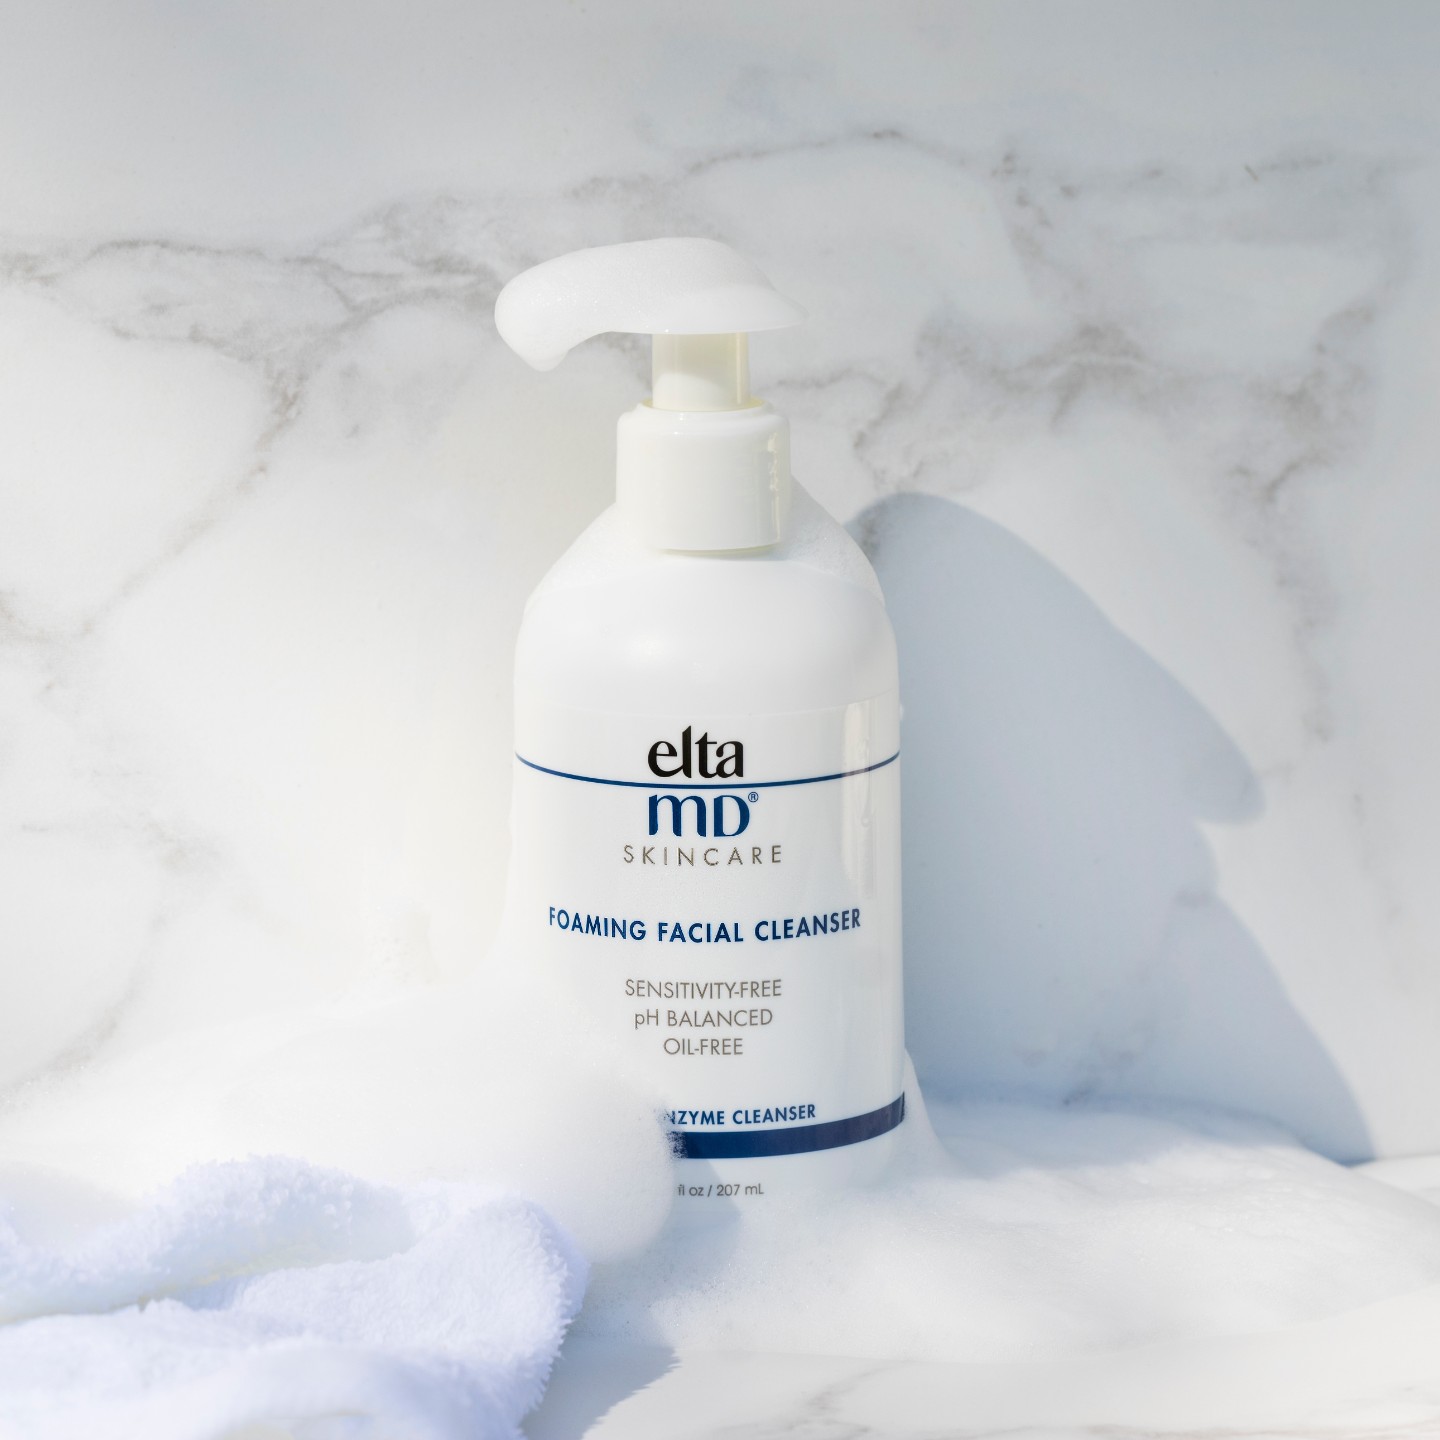 Elta MD Skincare foaming facial cleanser